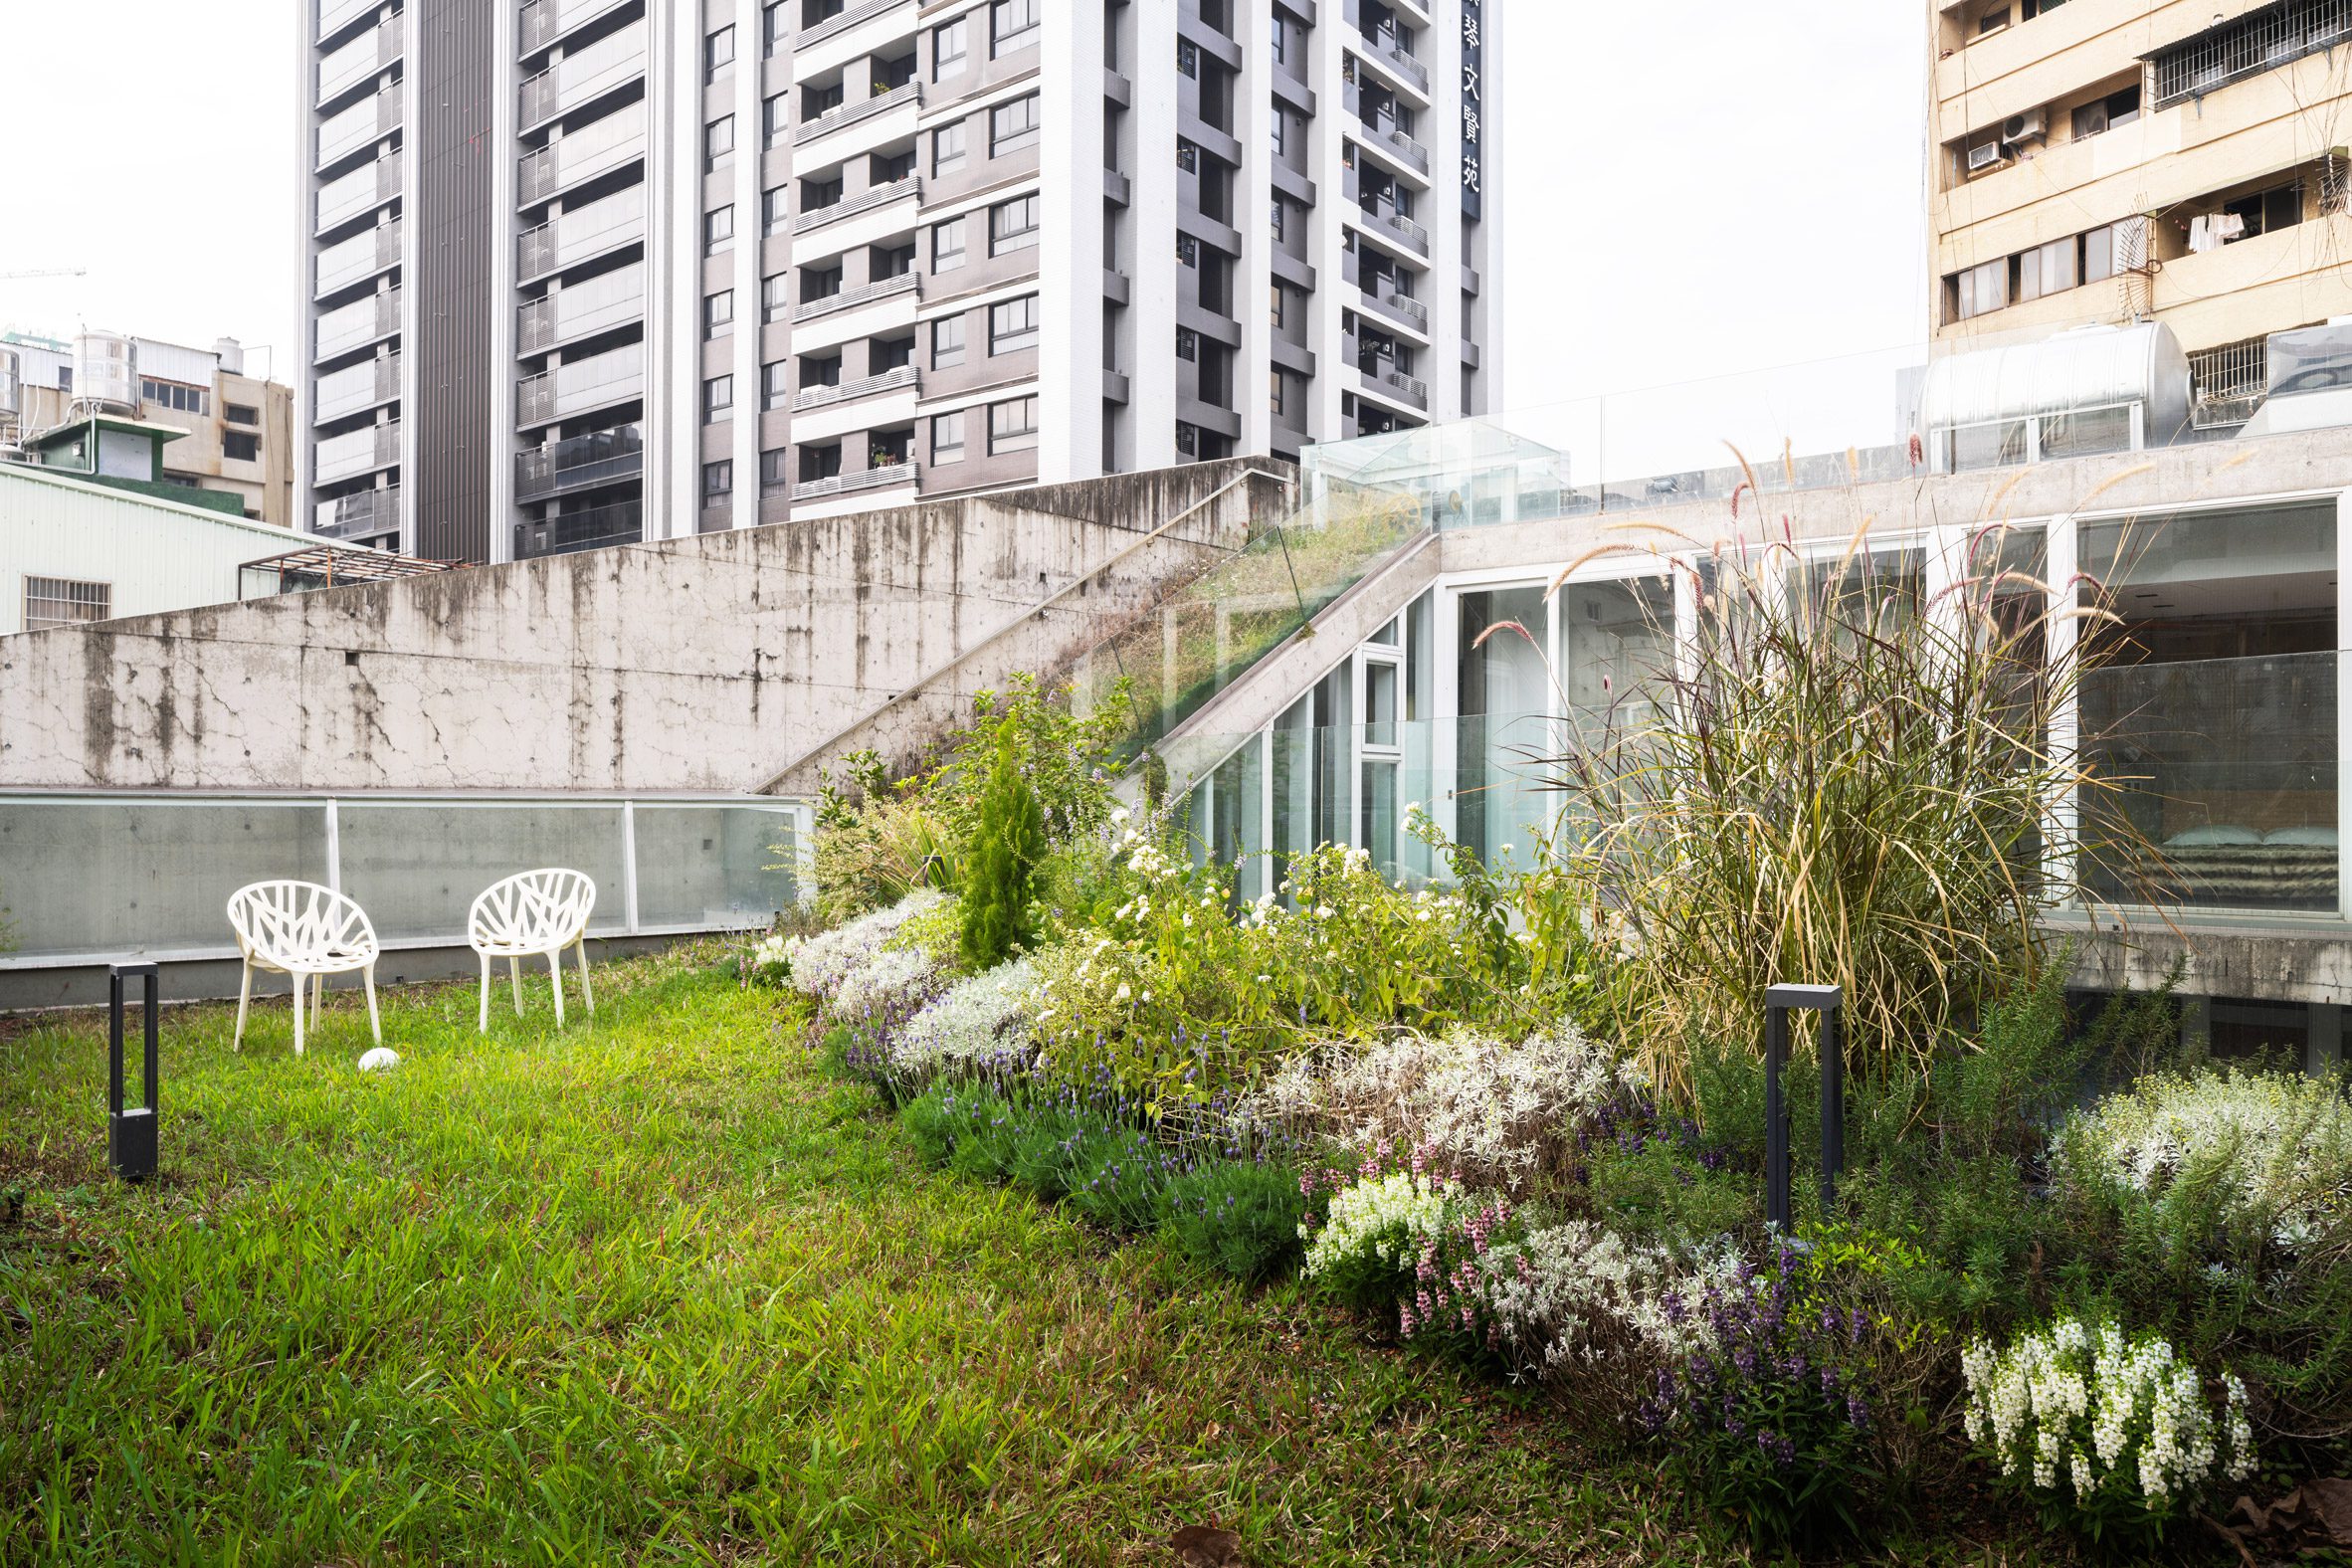 Green roof garden of a concrete home with a skyrise in the background